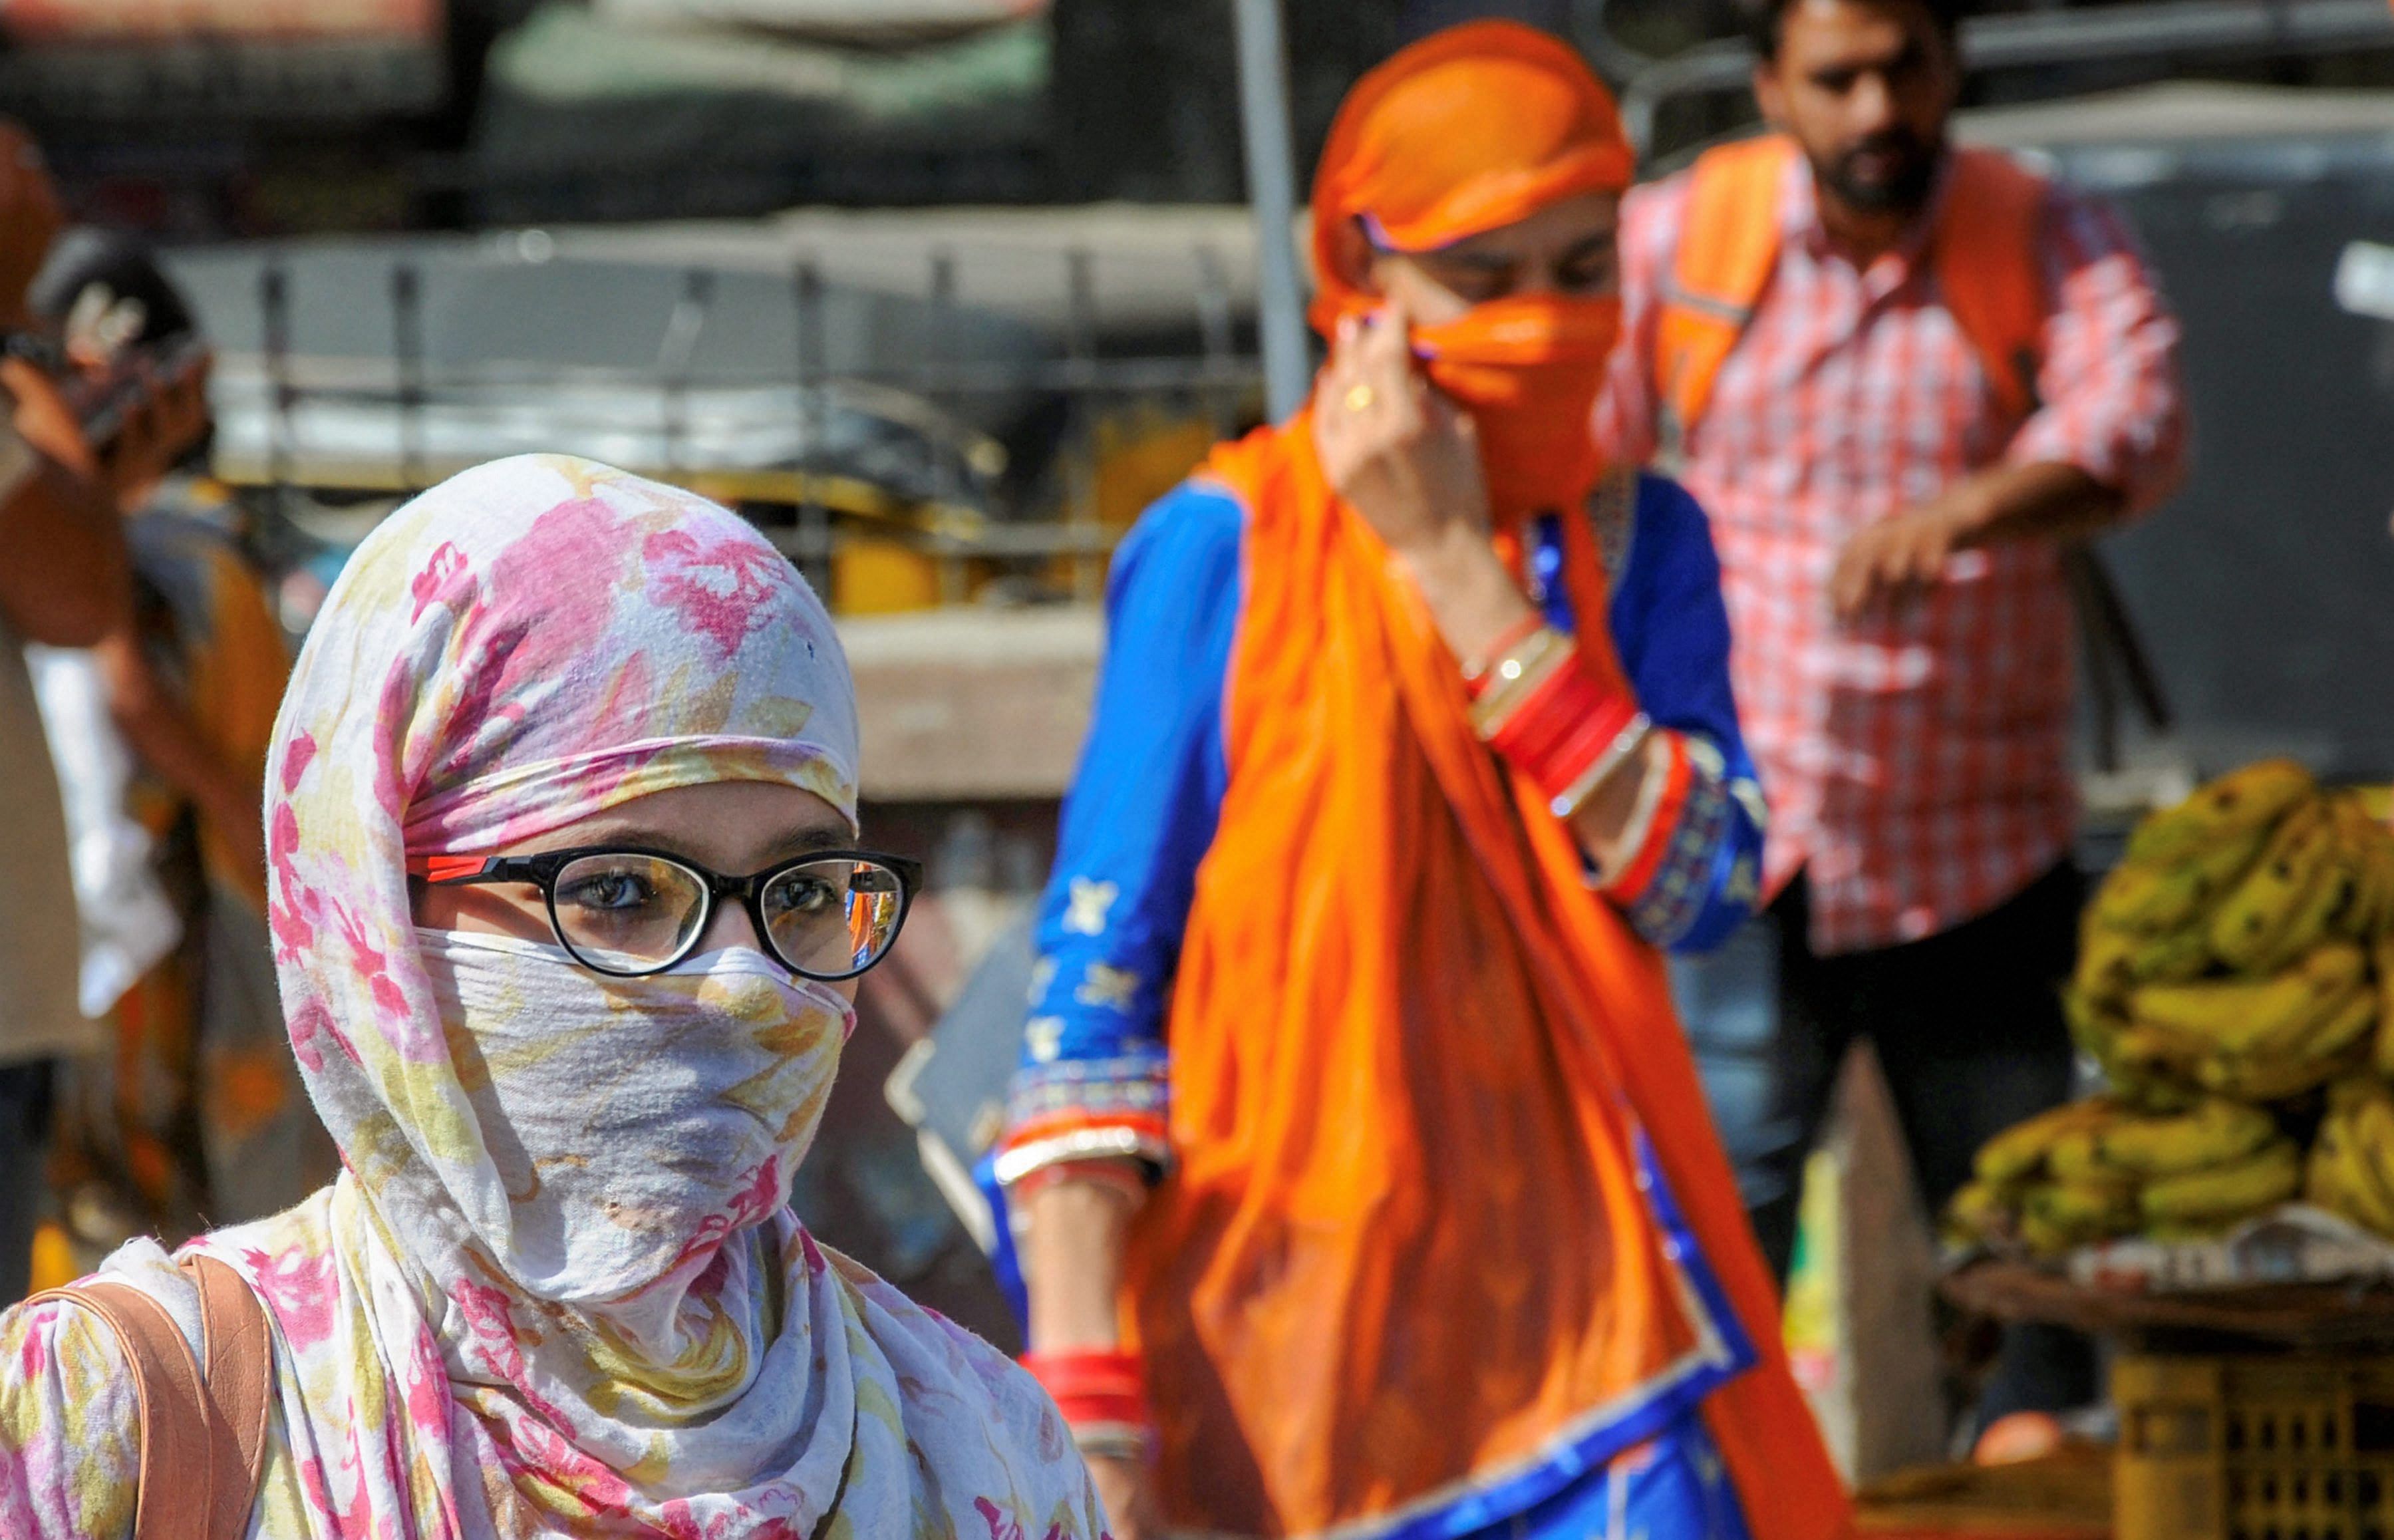 People shield themselves against direct heat on a hot, summer day, as temperature soars, in Amritsar, on Wednesday. PTI